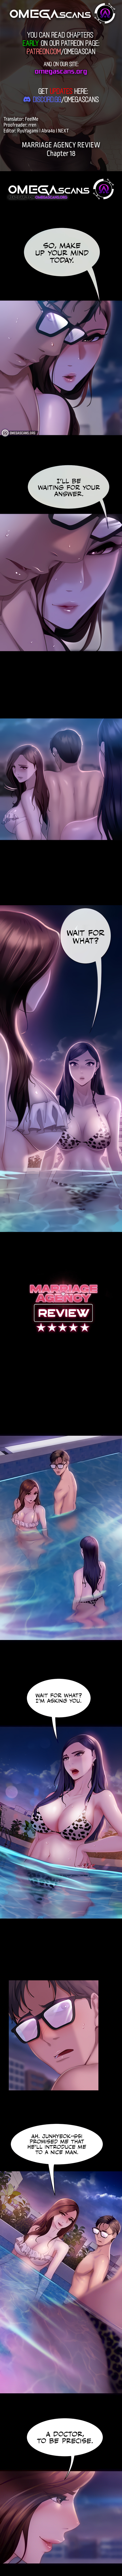 Marriage Agency Review NEW image